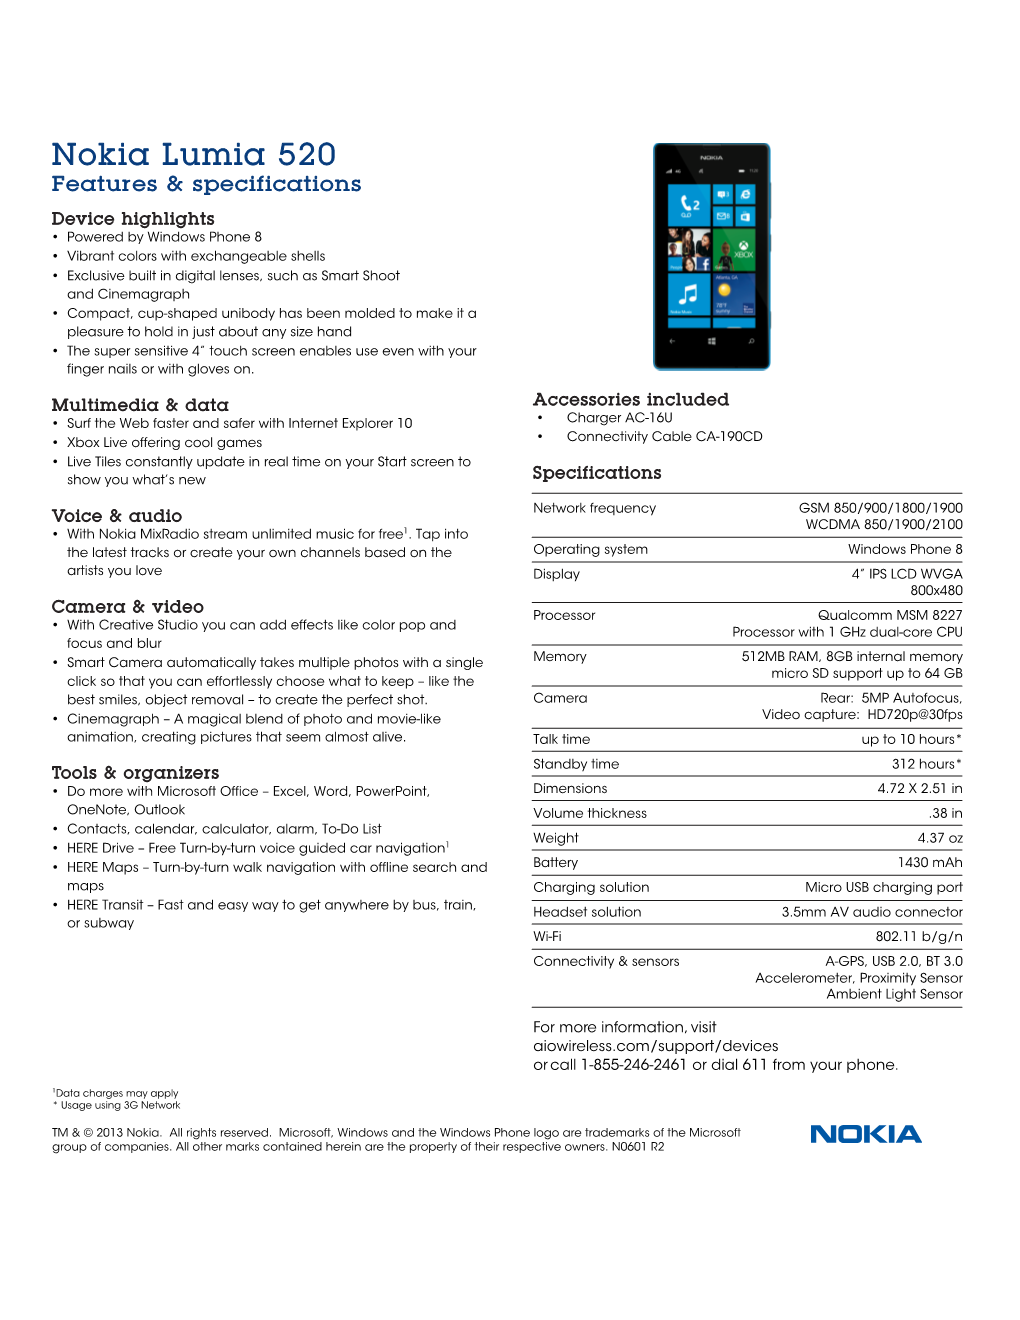 Nokia Lumia 520 Features & Specifications